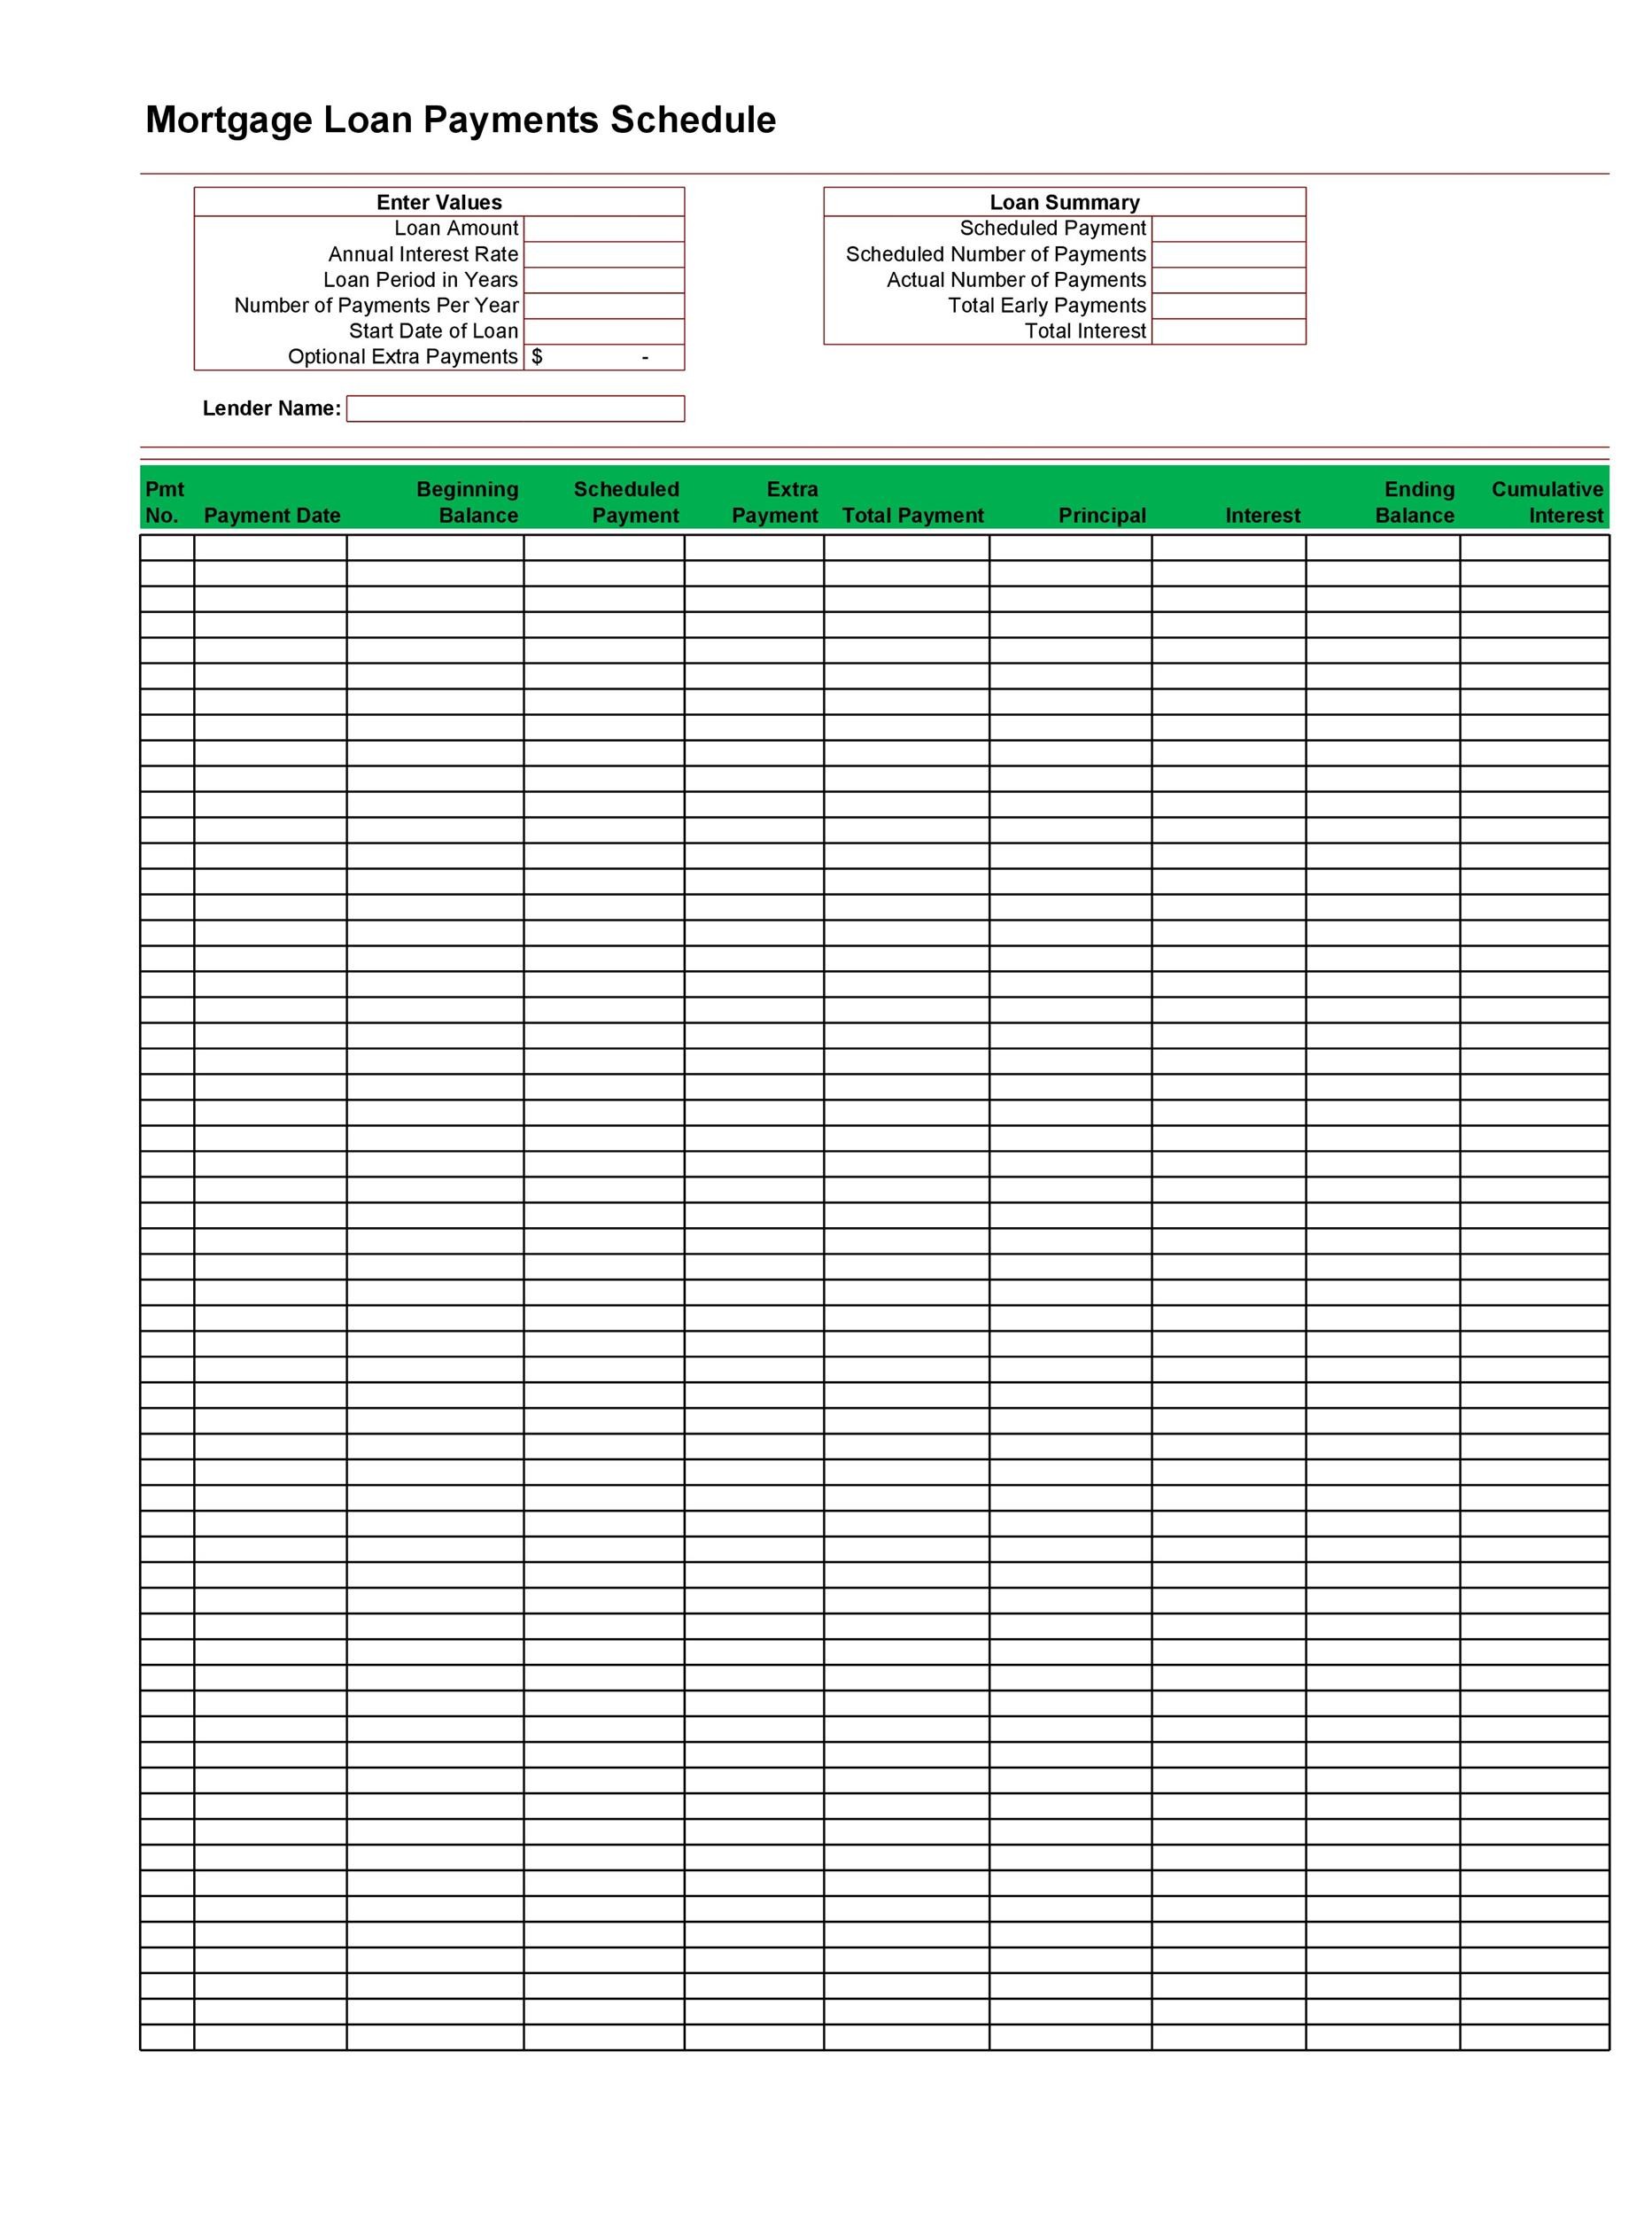 Loan Payment Schedule Excel Template